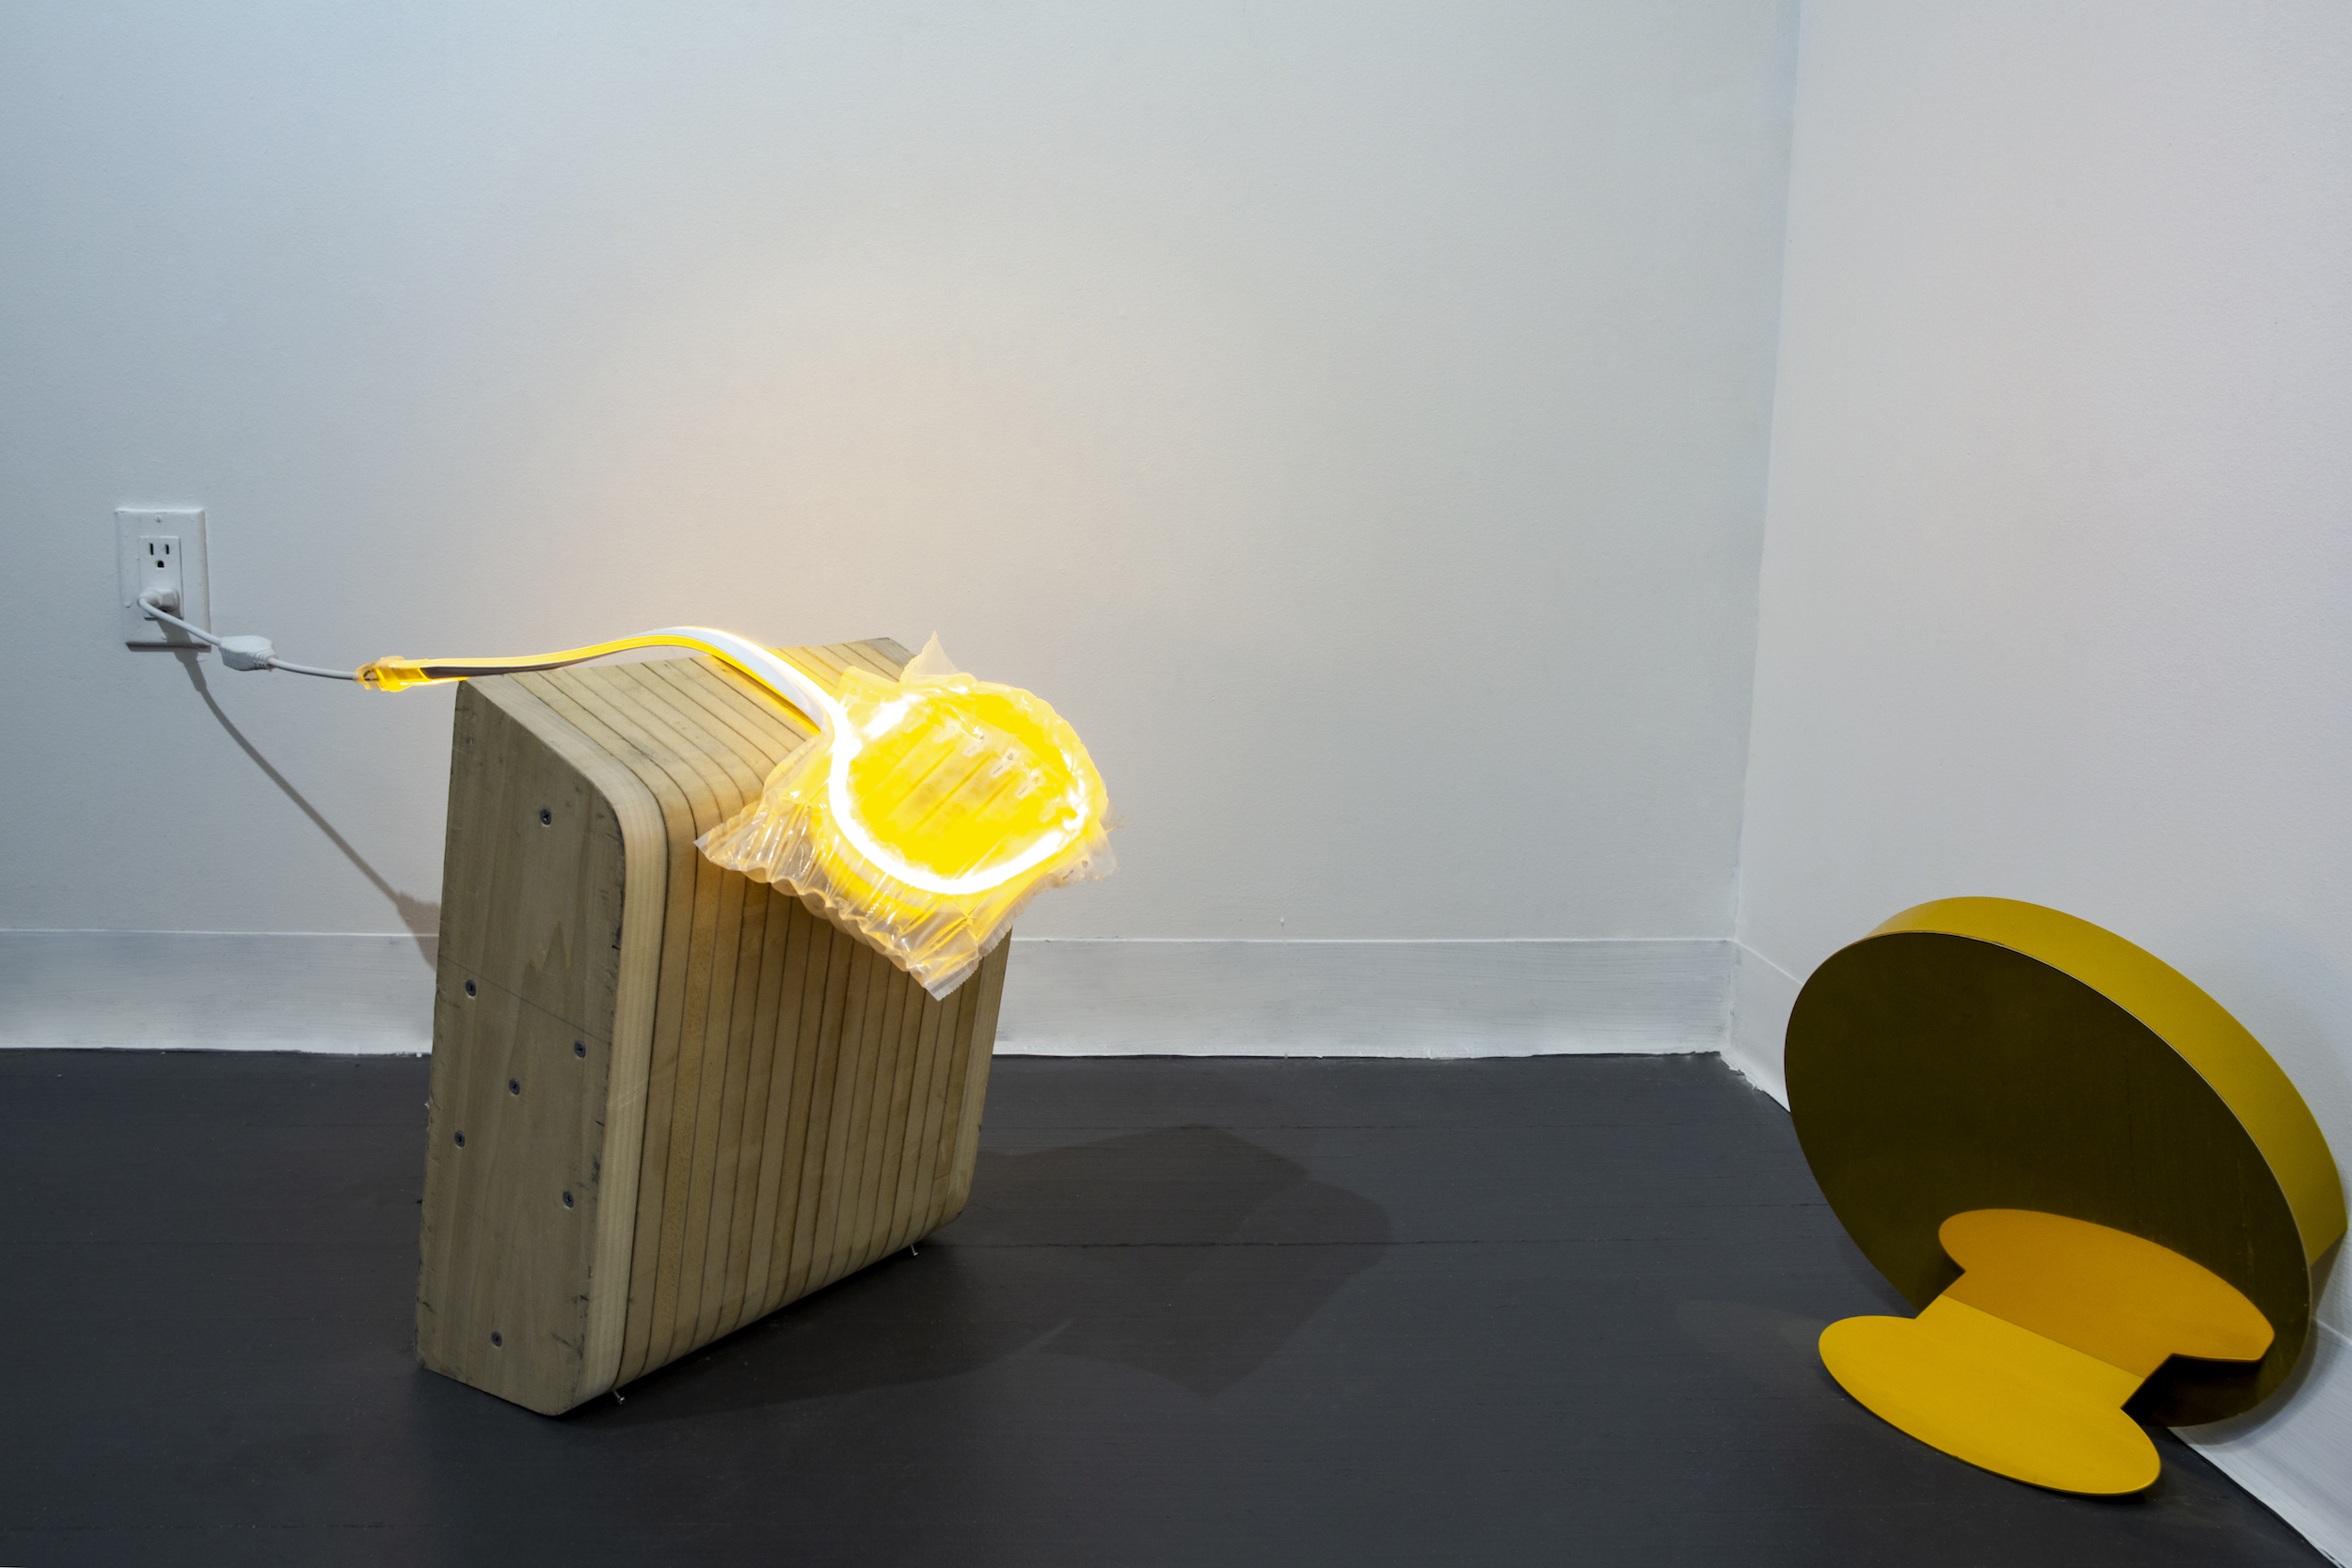    You’ve also been naughty lately!    Found wooden block and sculpture, LED light strip, used air bubble bag and plastic bag, and screw  Left: Approx. 38 x 12 6/8 x 15 7/8 inches  Right: Approx. 12 x 12 x 1 6/8 inches  2018 